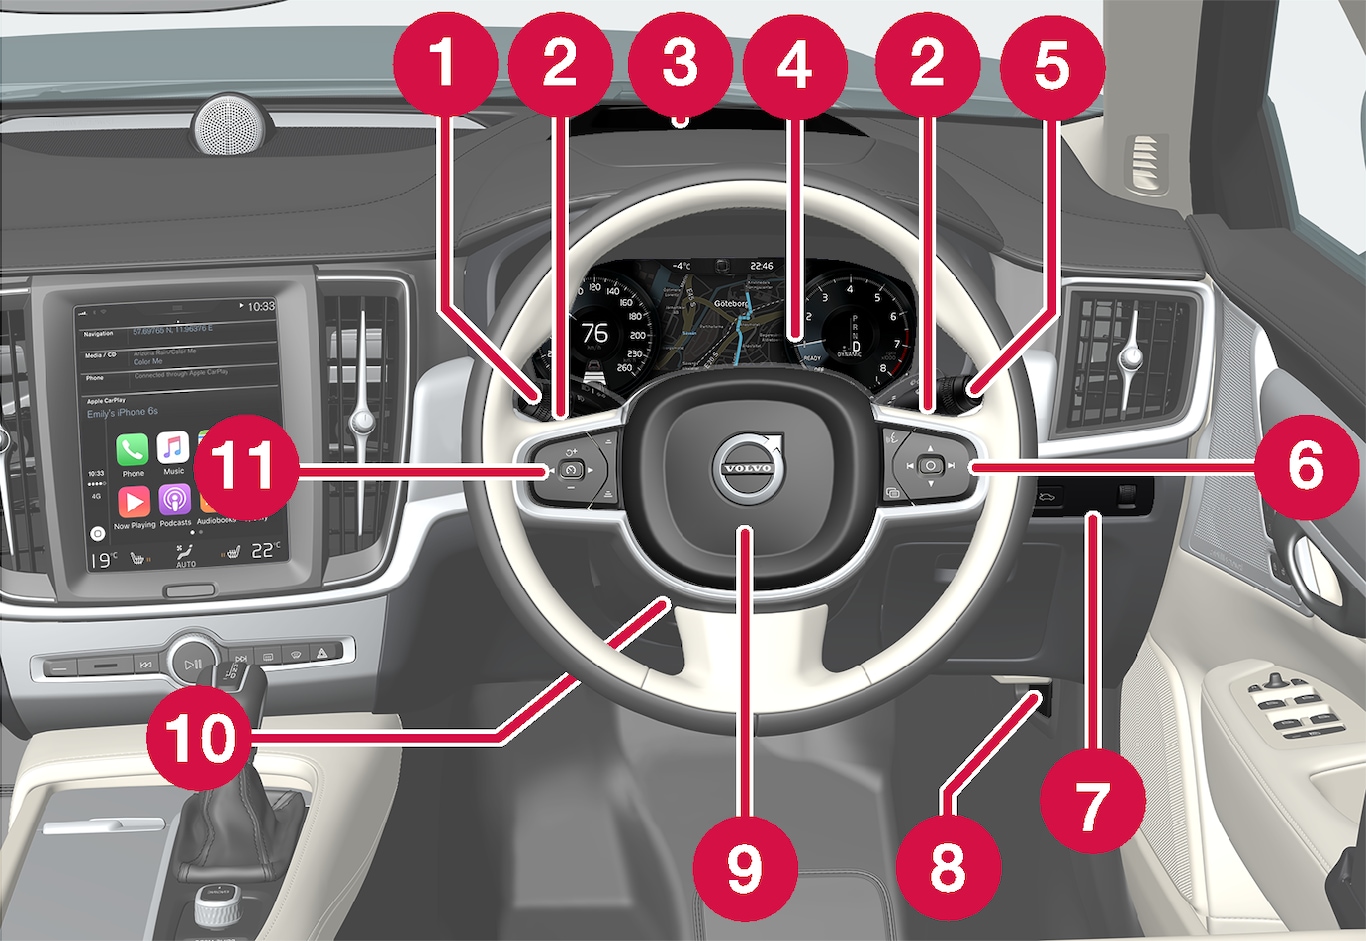 16w17-SPA-Instruments and controls 1 right hand drive